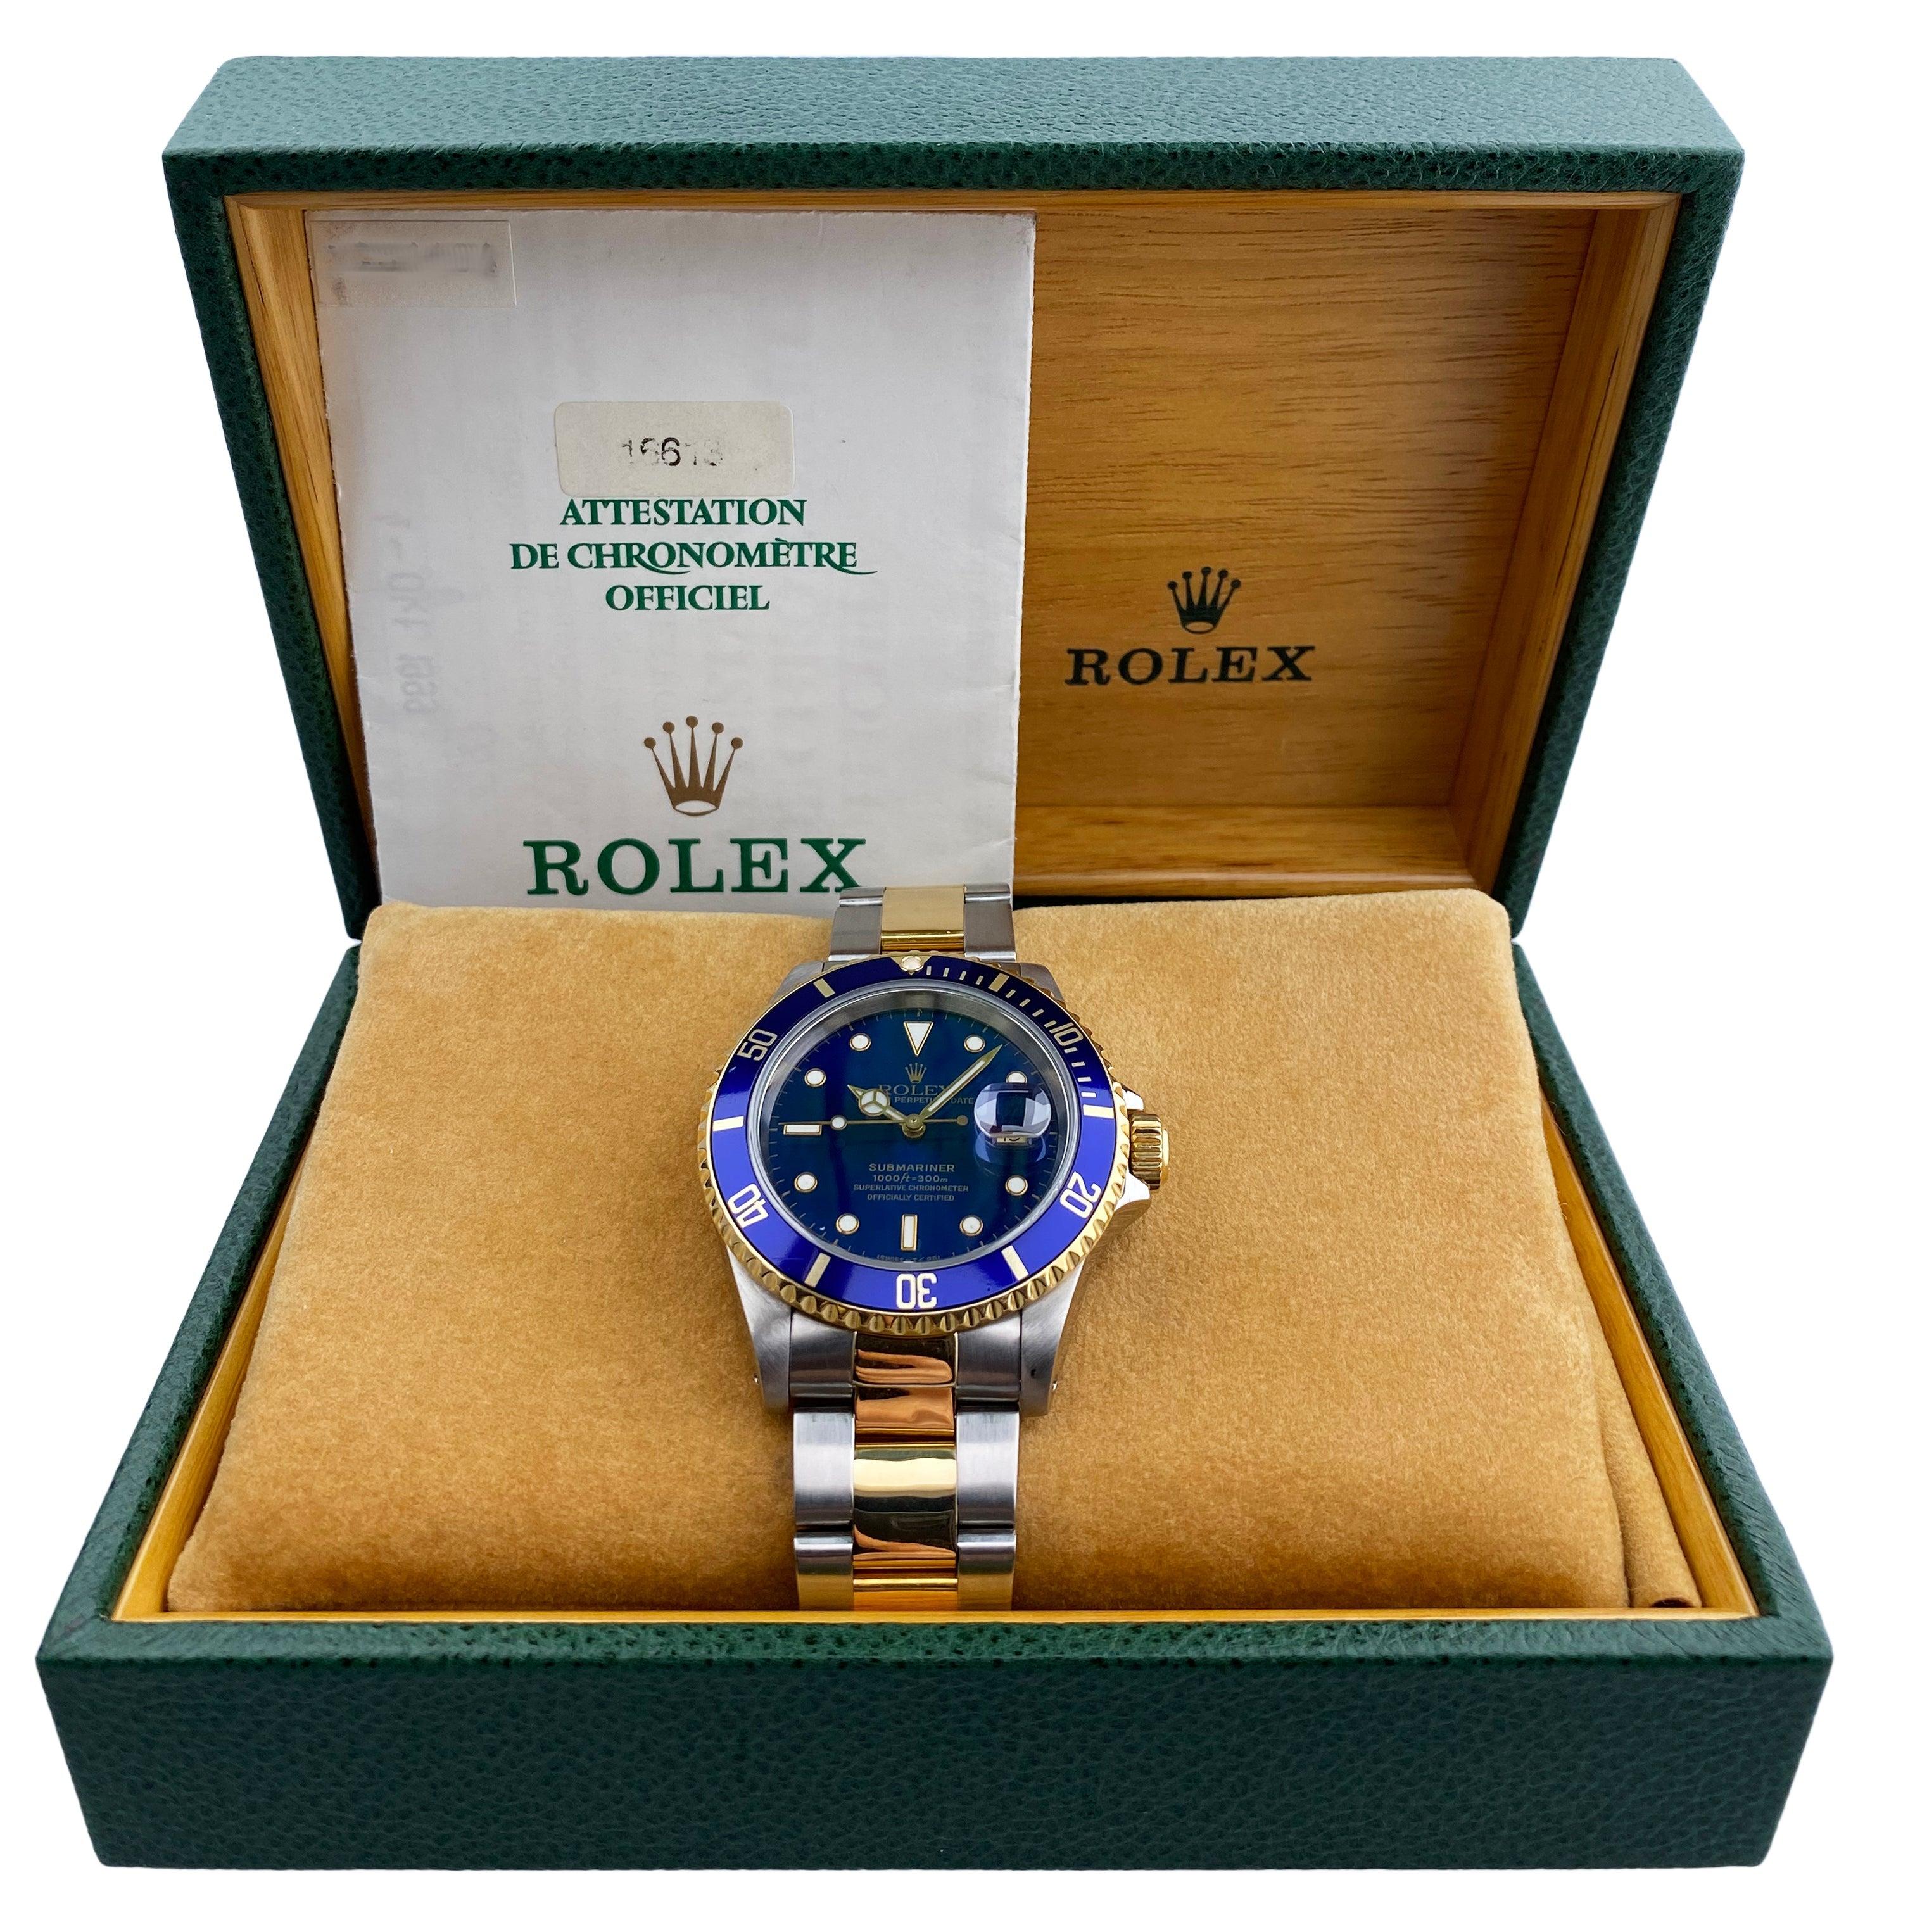 Rolex oyster perpetual Submariner Date 16613 Men's Watch. 40mm Stainless steel case with 18k yellow gold bezel with blue bezel insert. Blue dial with gold luminous hands and dot hour markers. Stainless steel & 18K yellow gold oyster bracelet with